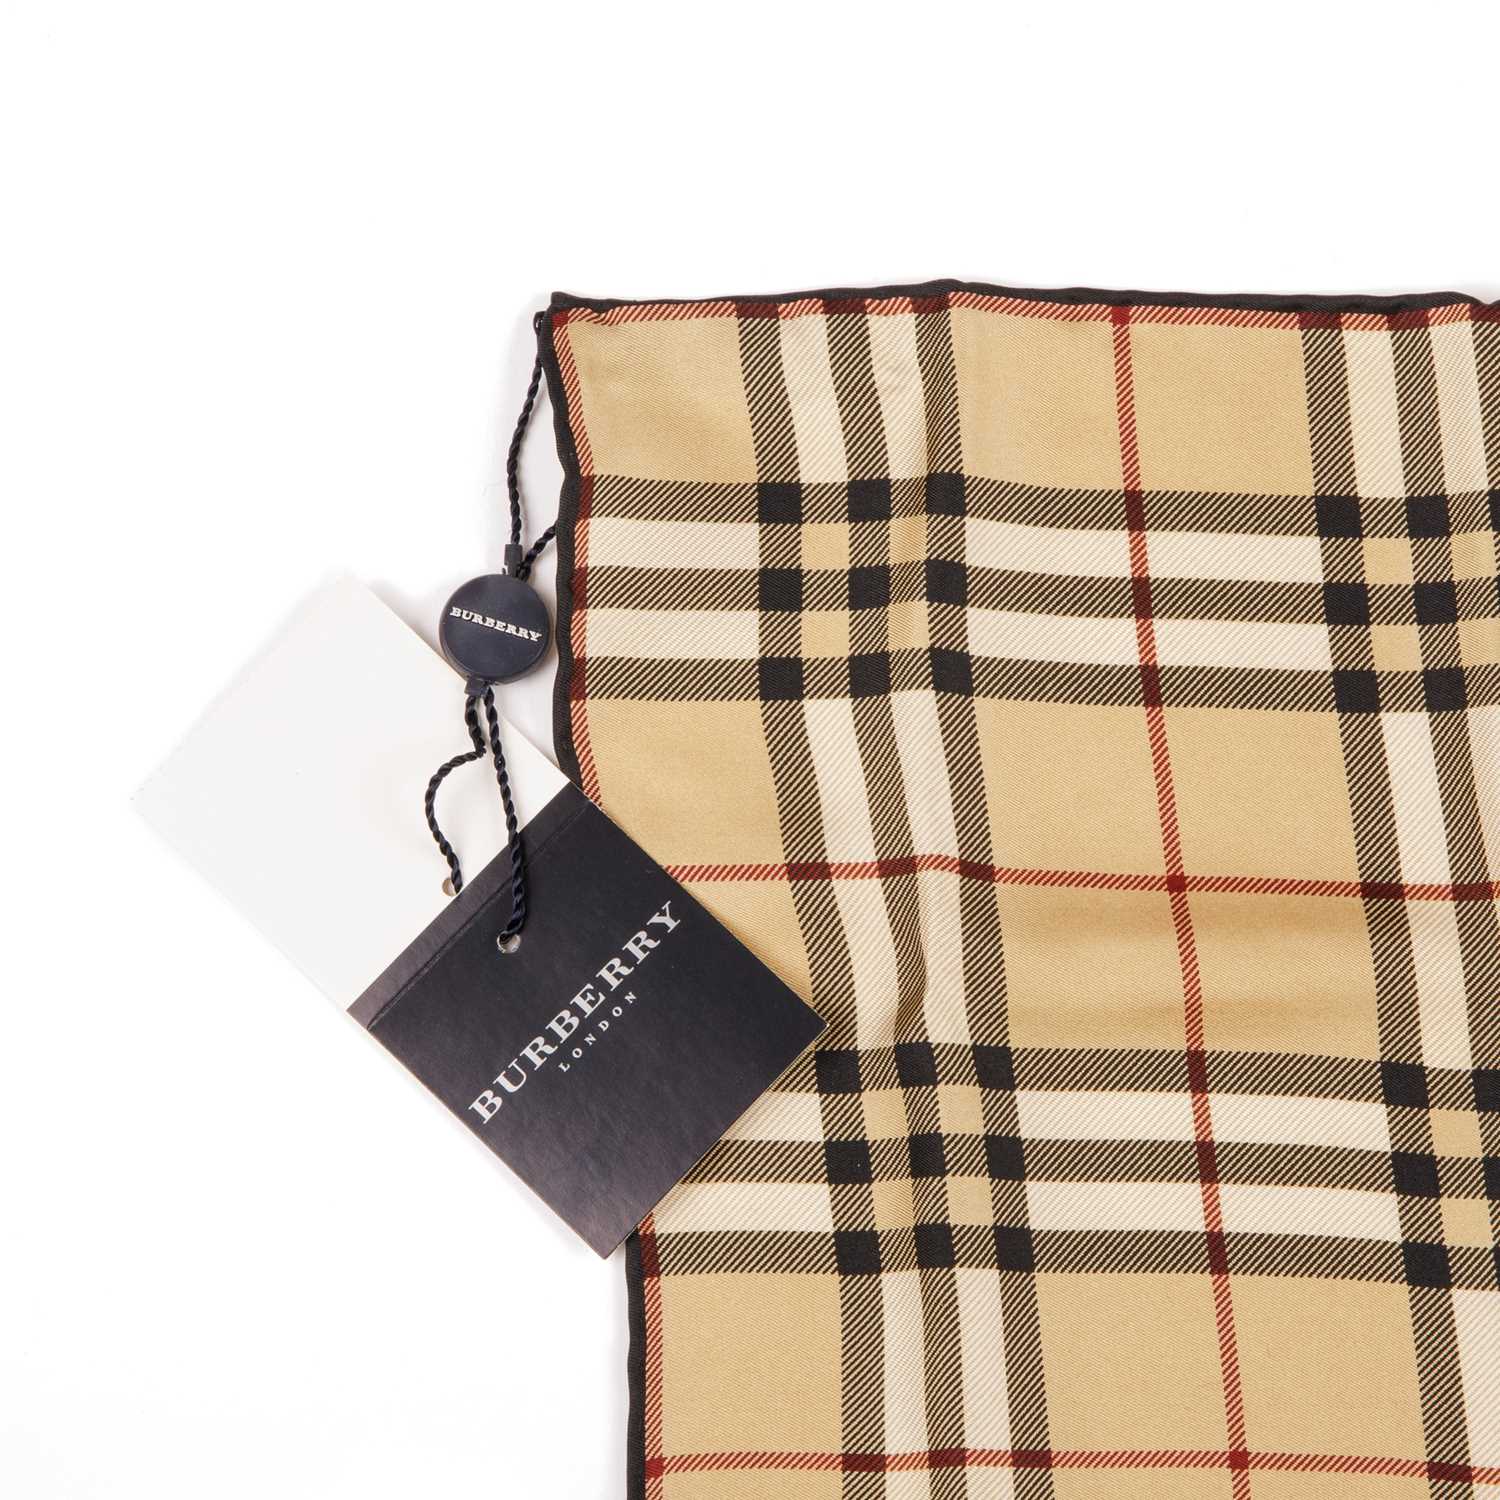 Burberry, two Nova Check silk handkerchiefs, with hand-rolled edges, measuring 47 by 47cm, with - Image 5 of 6